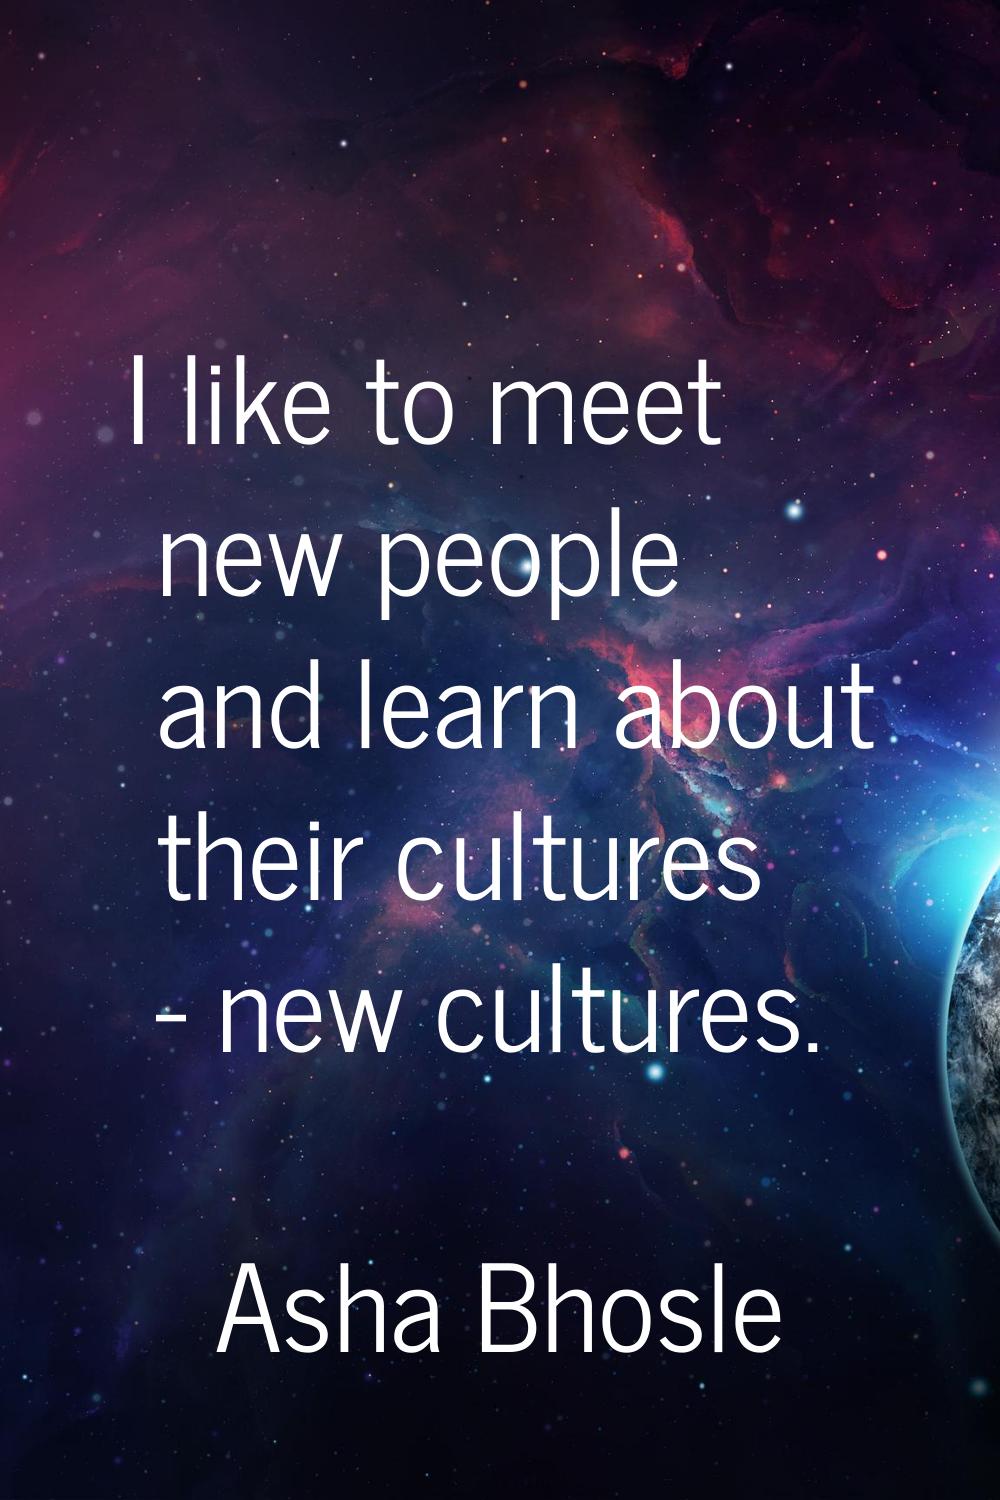 I like to meet new people and learn about their cultures - new cultures.